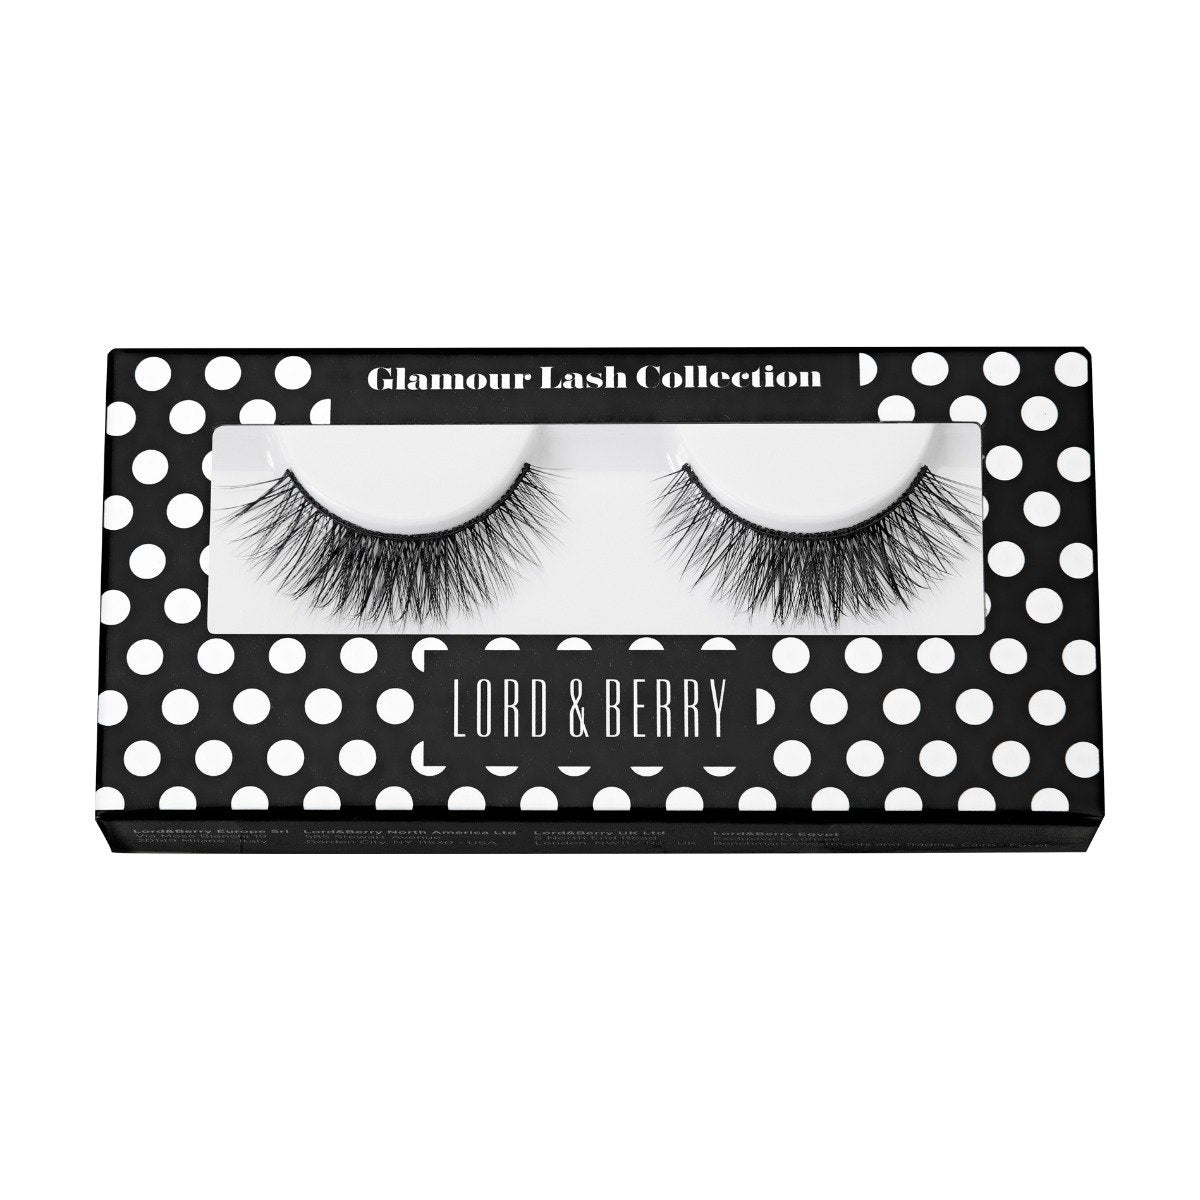 Lord & Berry Eyelashes Glamour Lash Collection - EL14 - Bloom Pharmacy